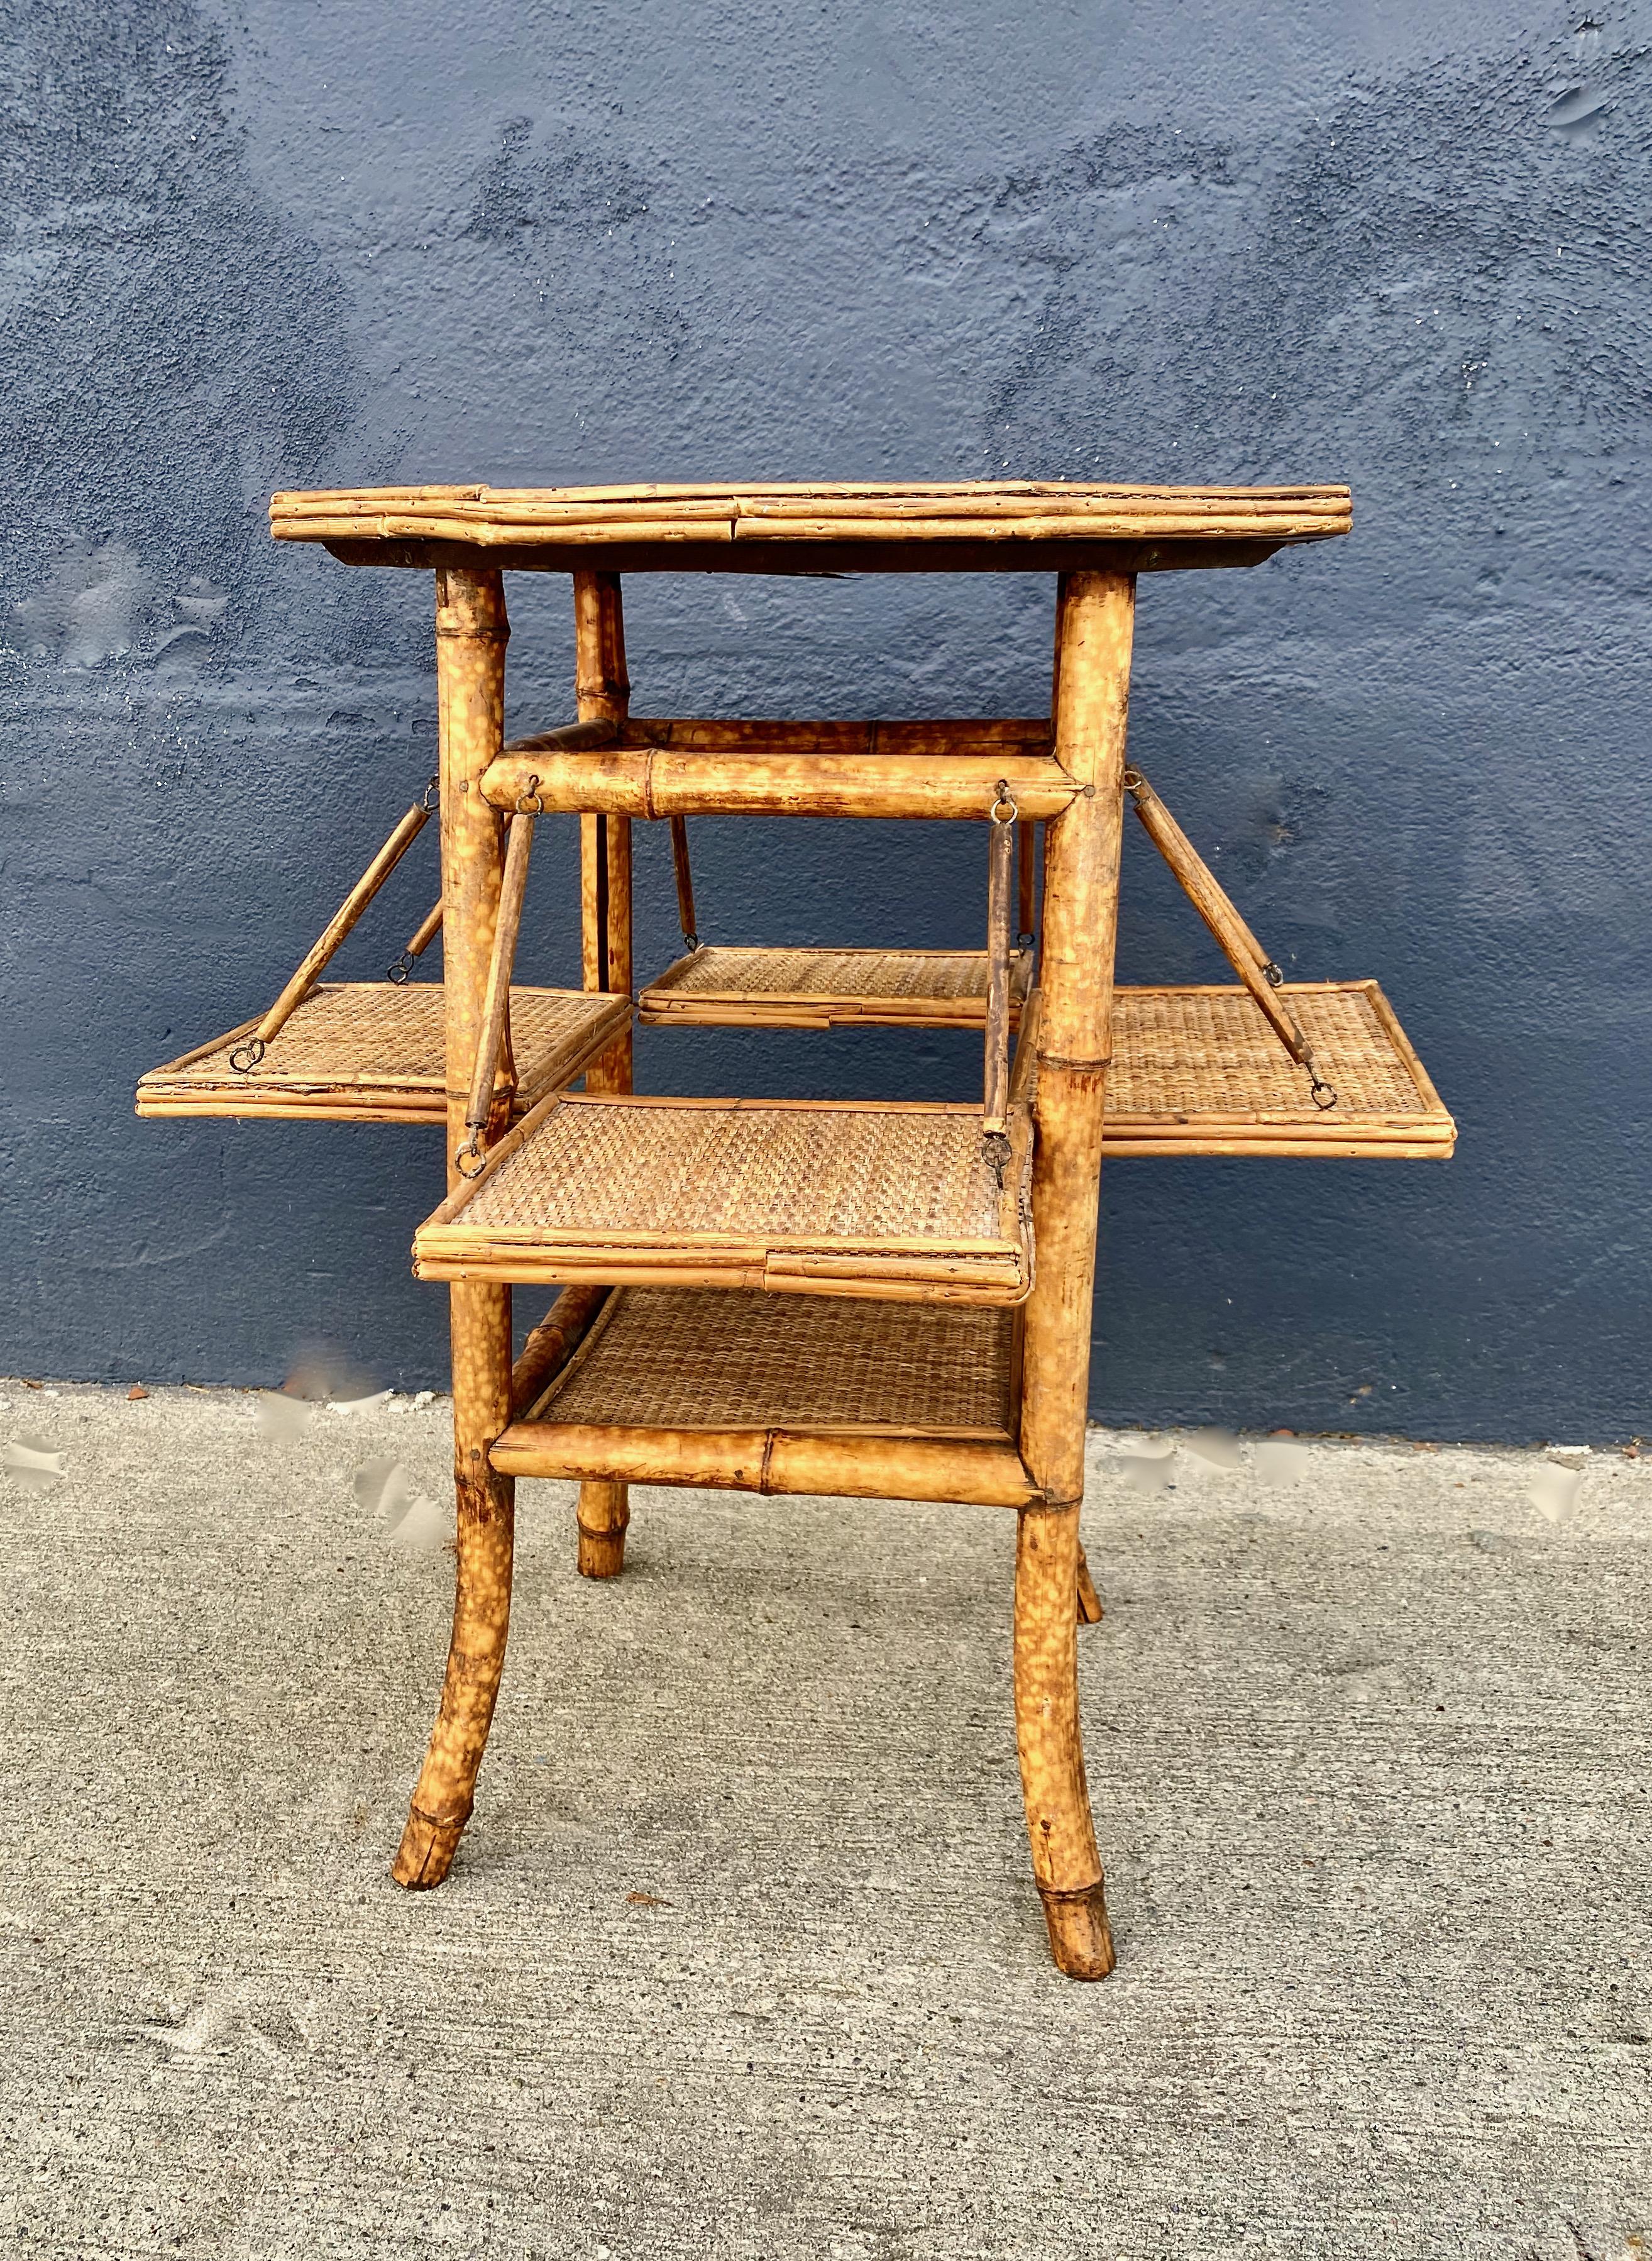 This is a charming late 19th or early 20th century English rattan and bamboo Tea Table. The hexagonal form of the table is somewhat unusual and adds interest. The table is in overall very good condition and features 4 fold-out side shelves which